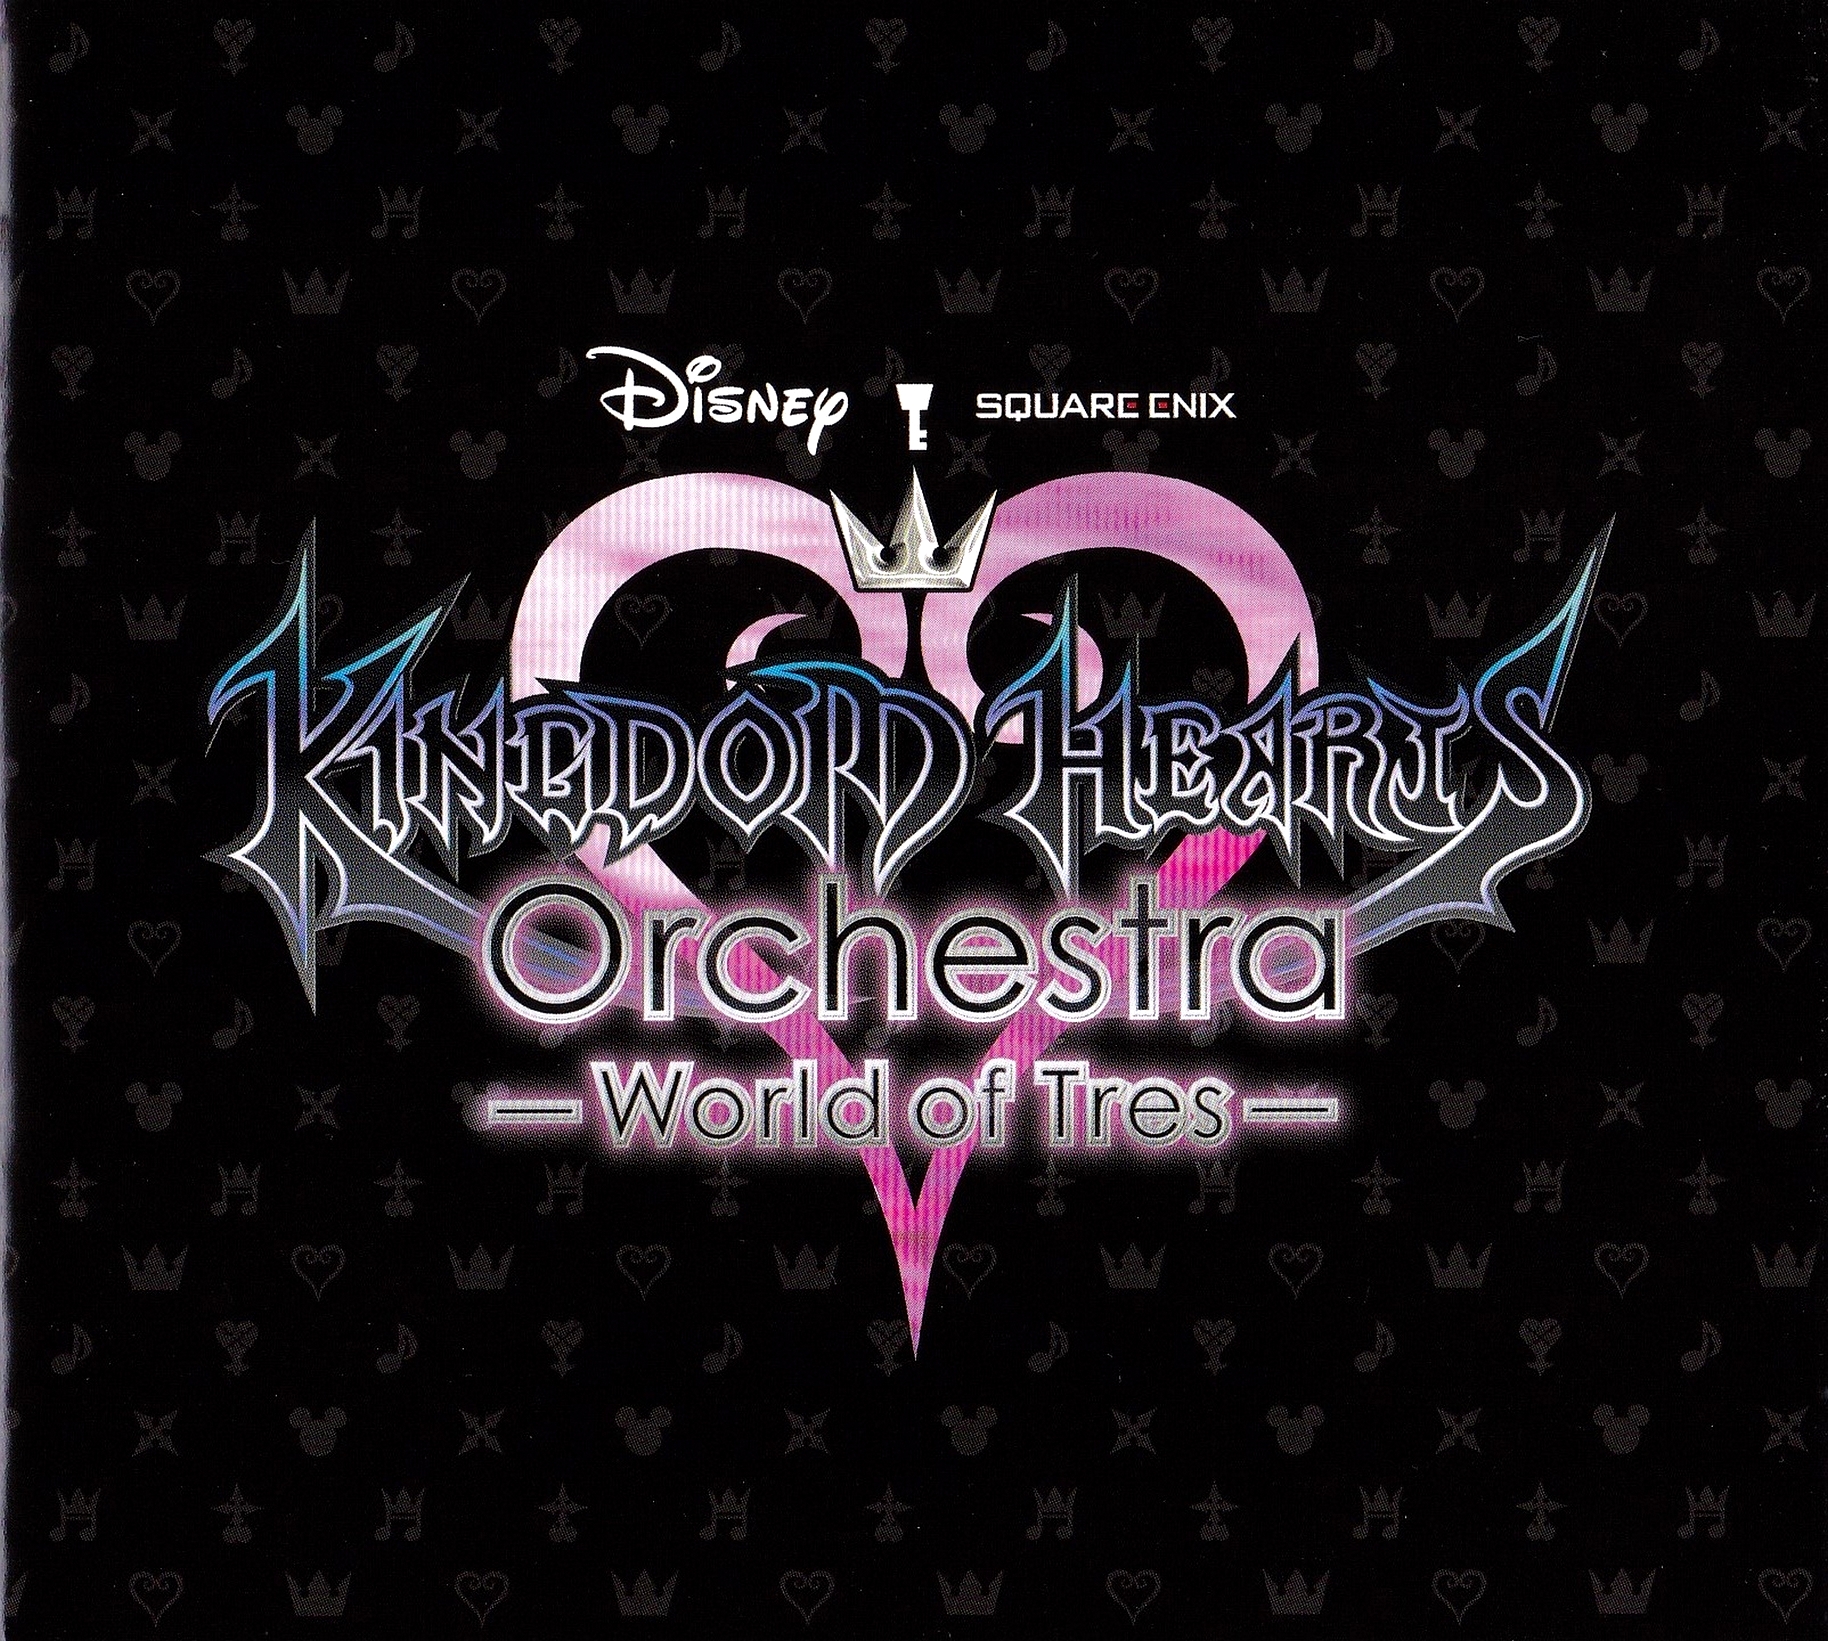 Kingdom Hearts Orchestra. Coffee talk Episode 2: Hibiscus & Butterfly. Future World Orchestra - the best of Future World Orchestra. The best Orchestra in the World.